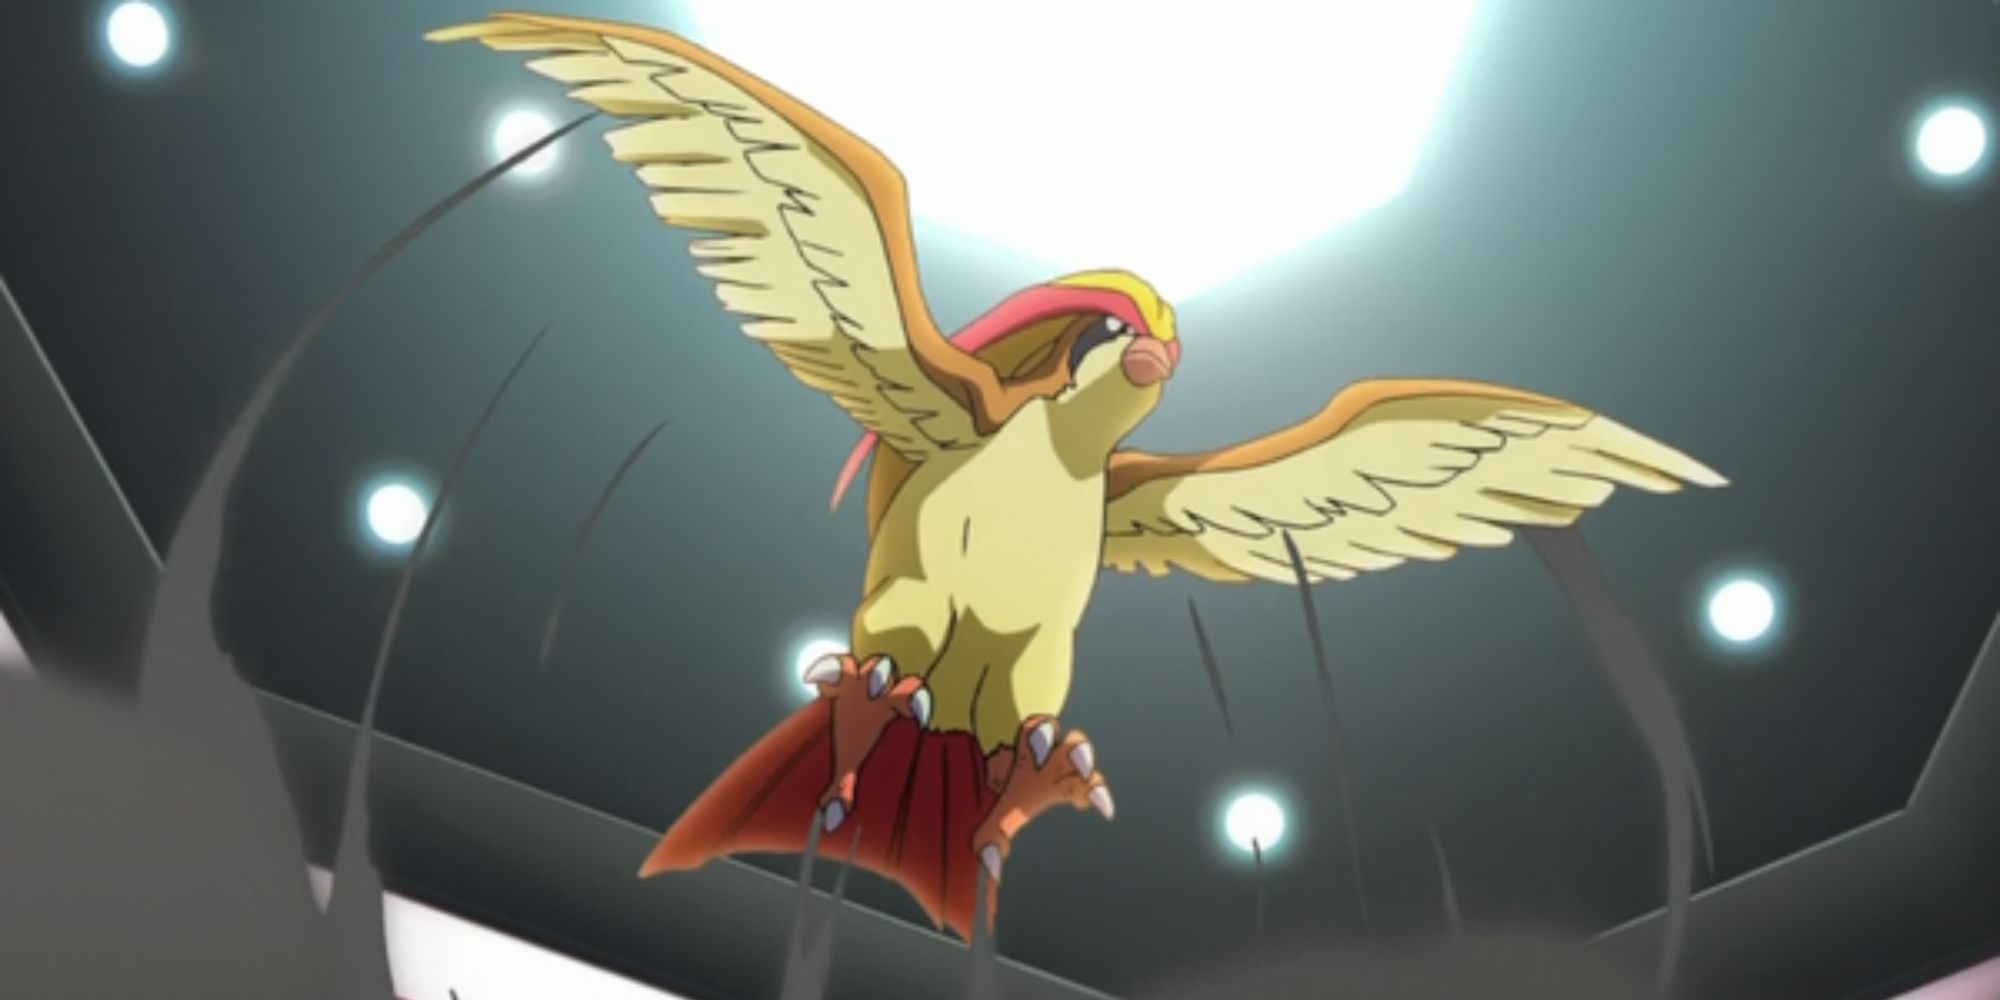 Pidgeot blasts dust everywhere after launching into the air